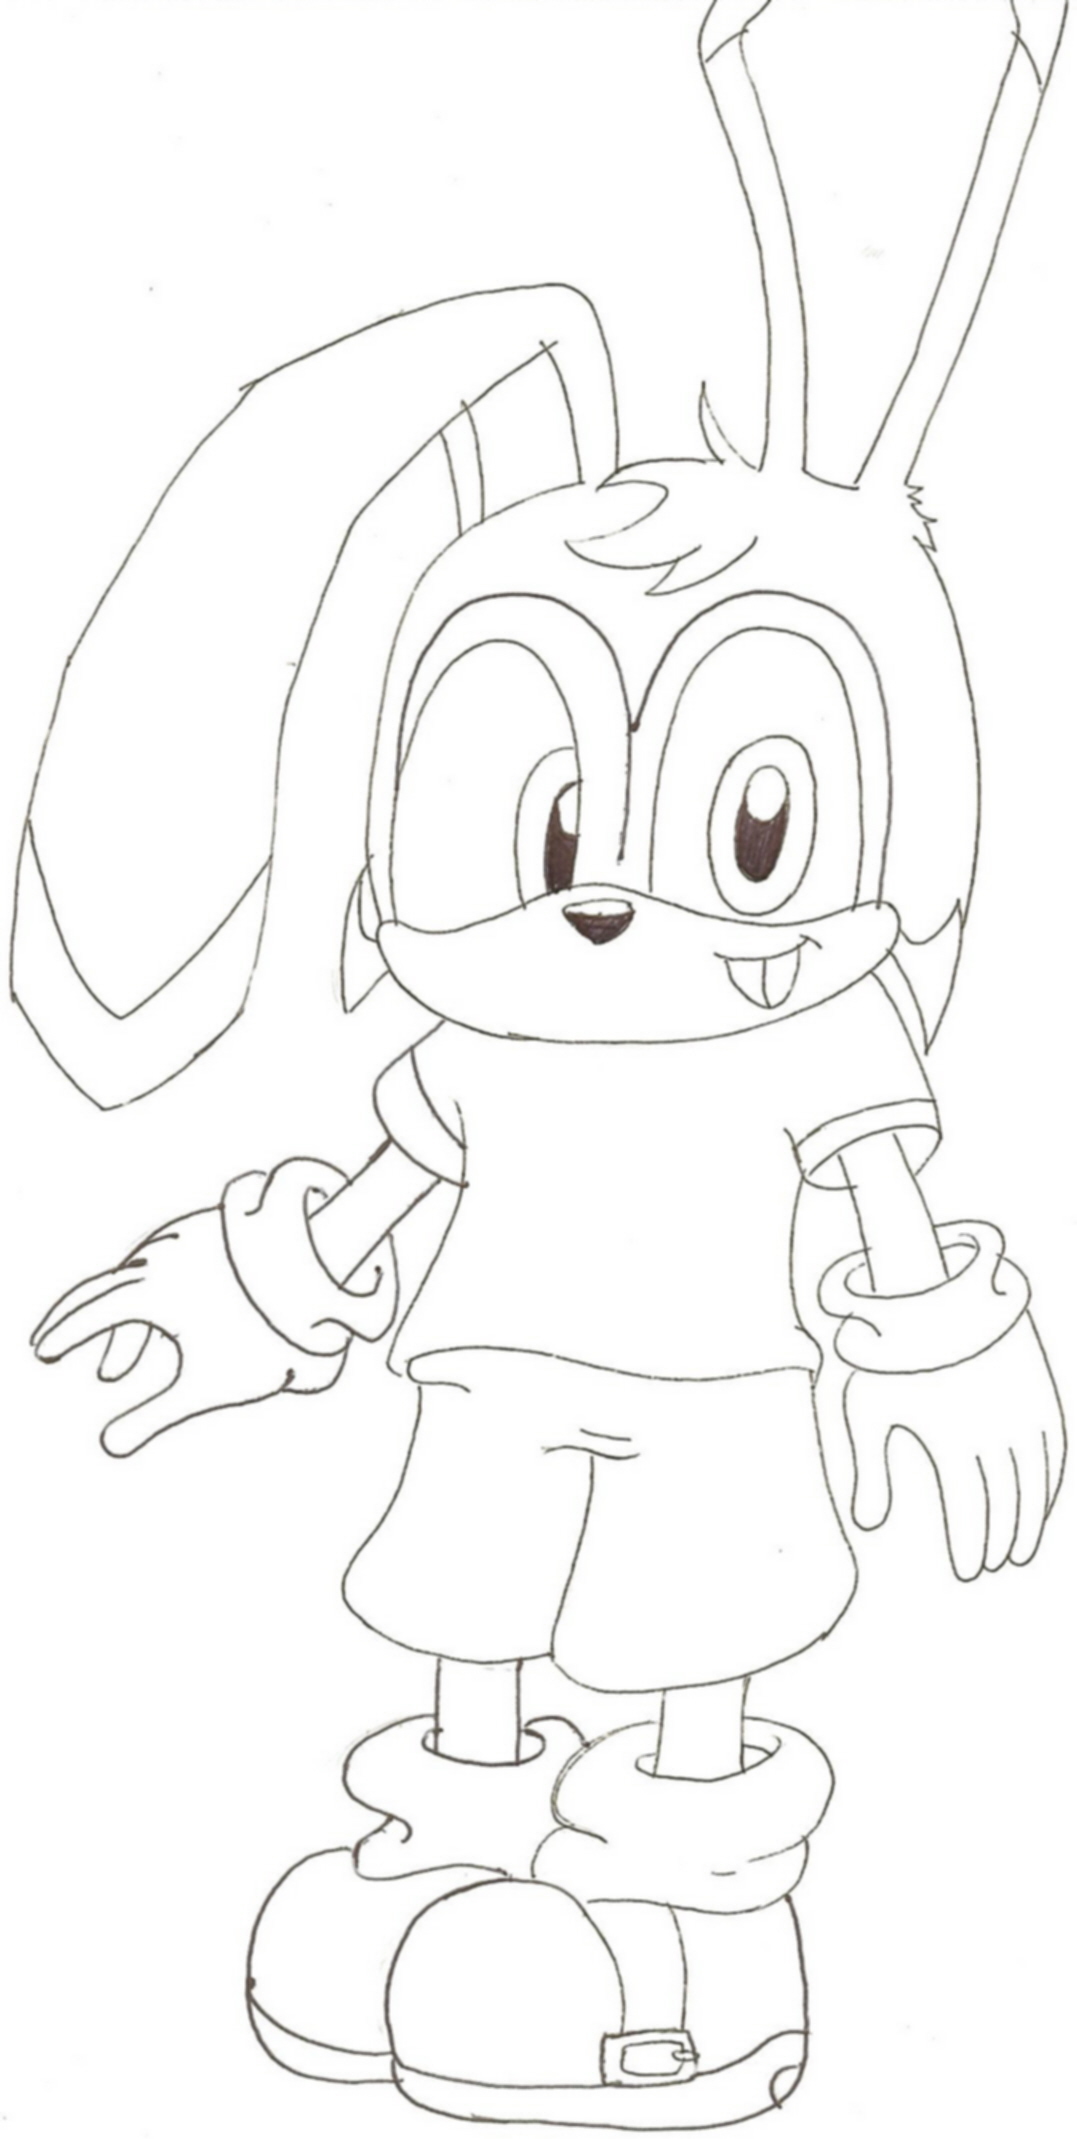 Berry the Bunny by jkgoomba89